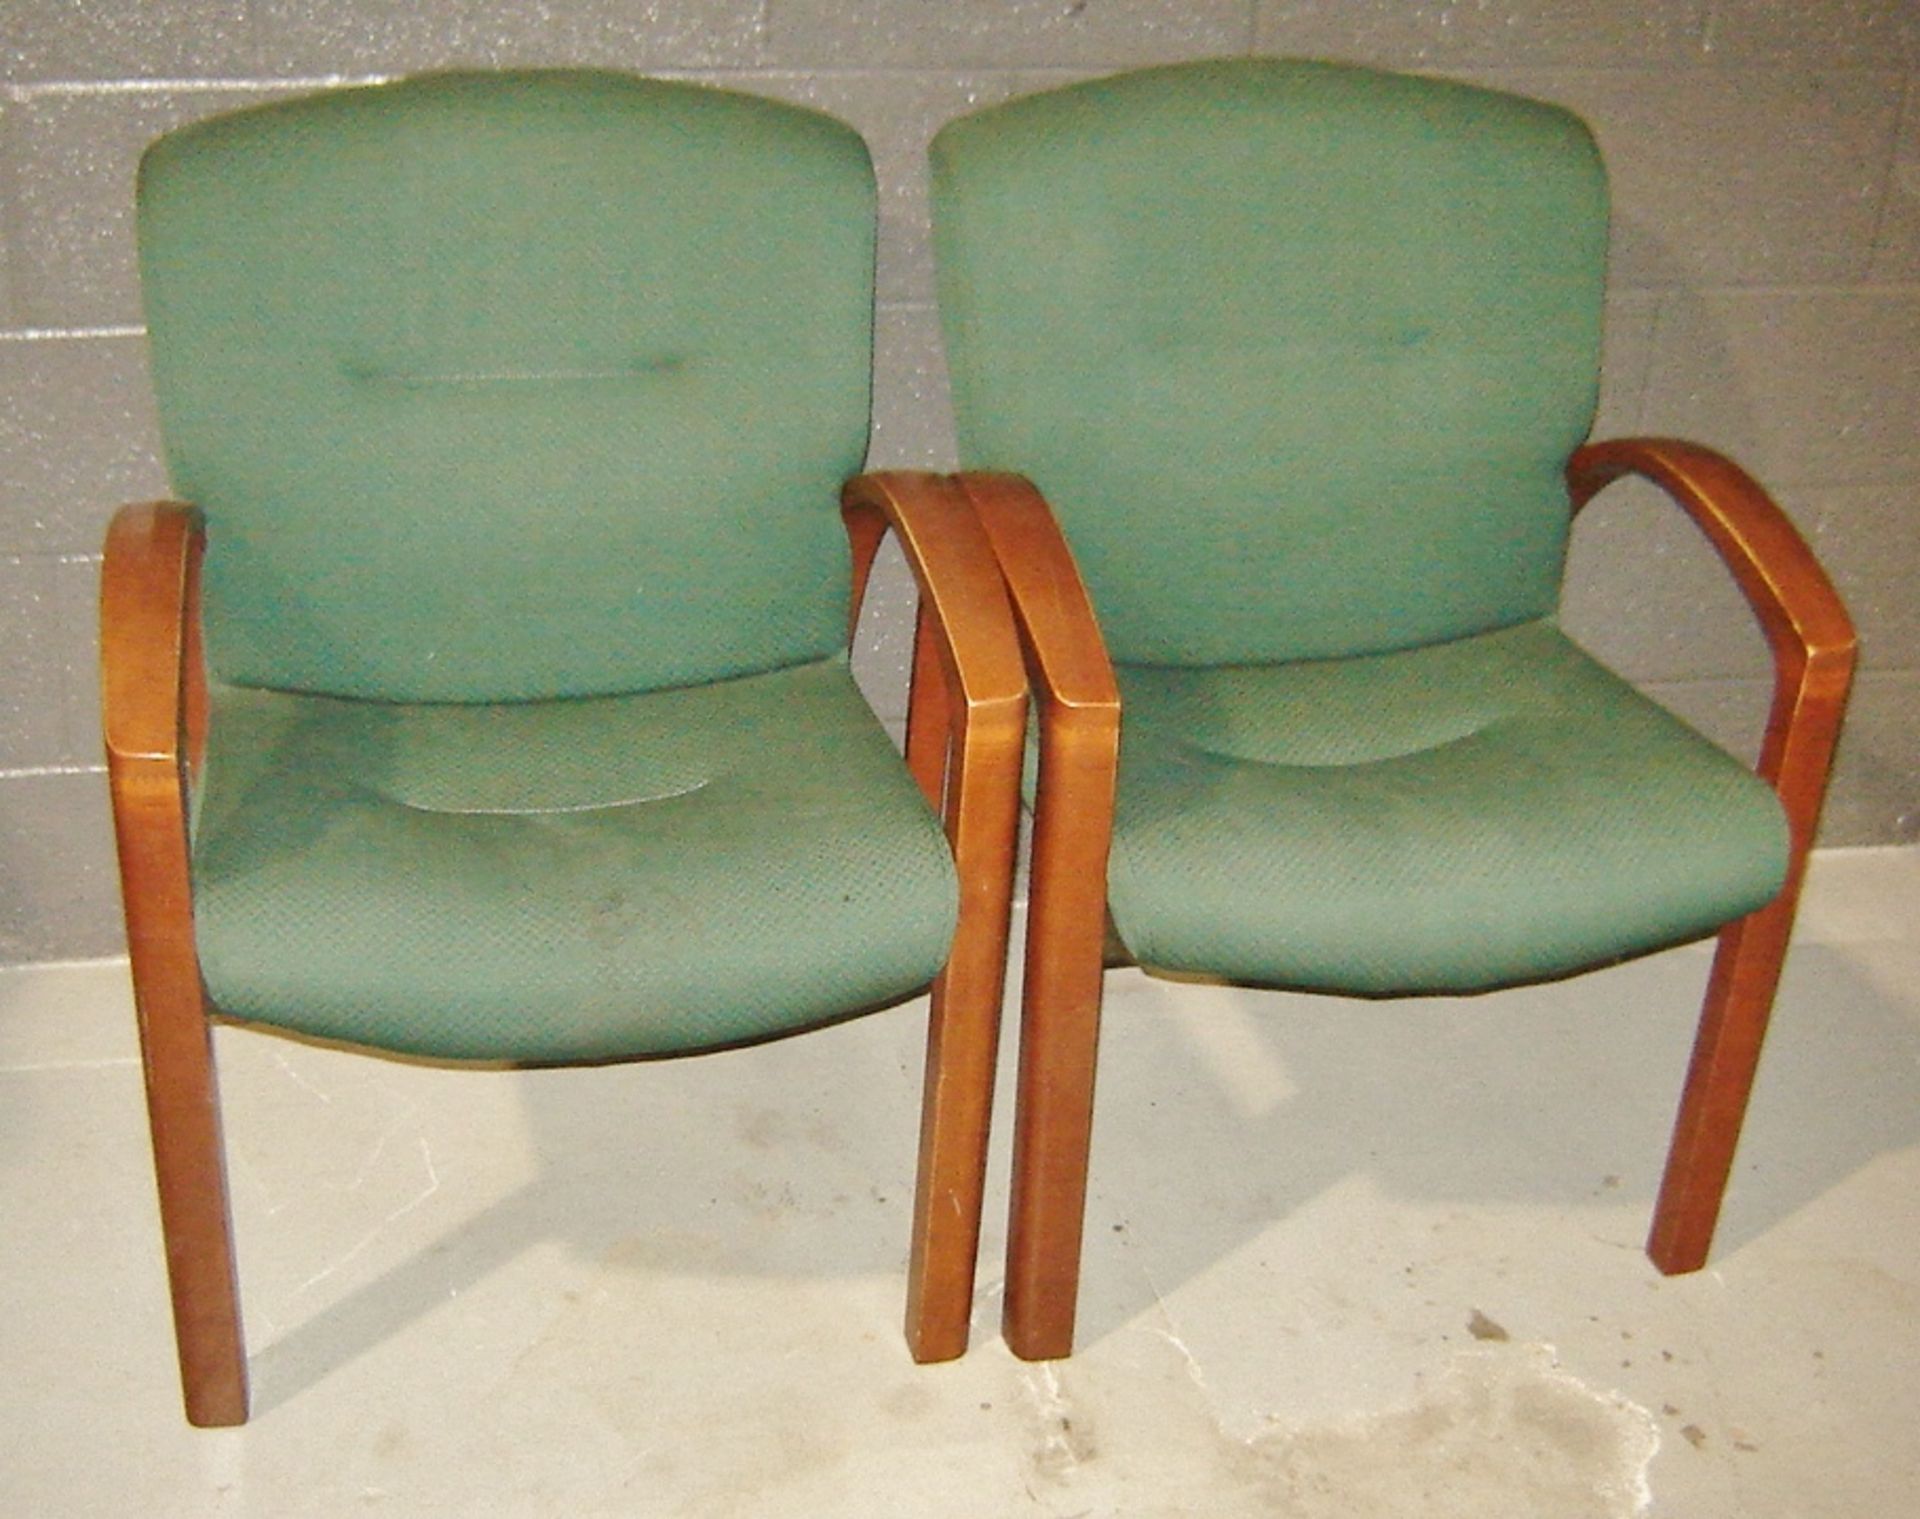 Upholstered & Wooden Frame Arm Chairs - Image 2 of 4